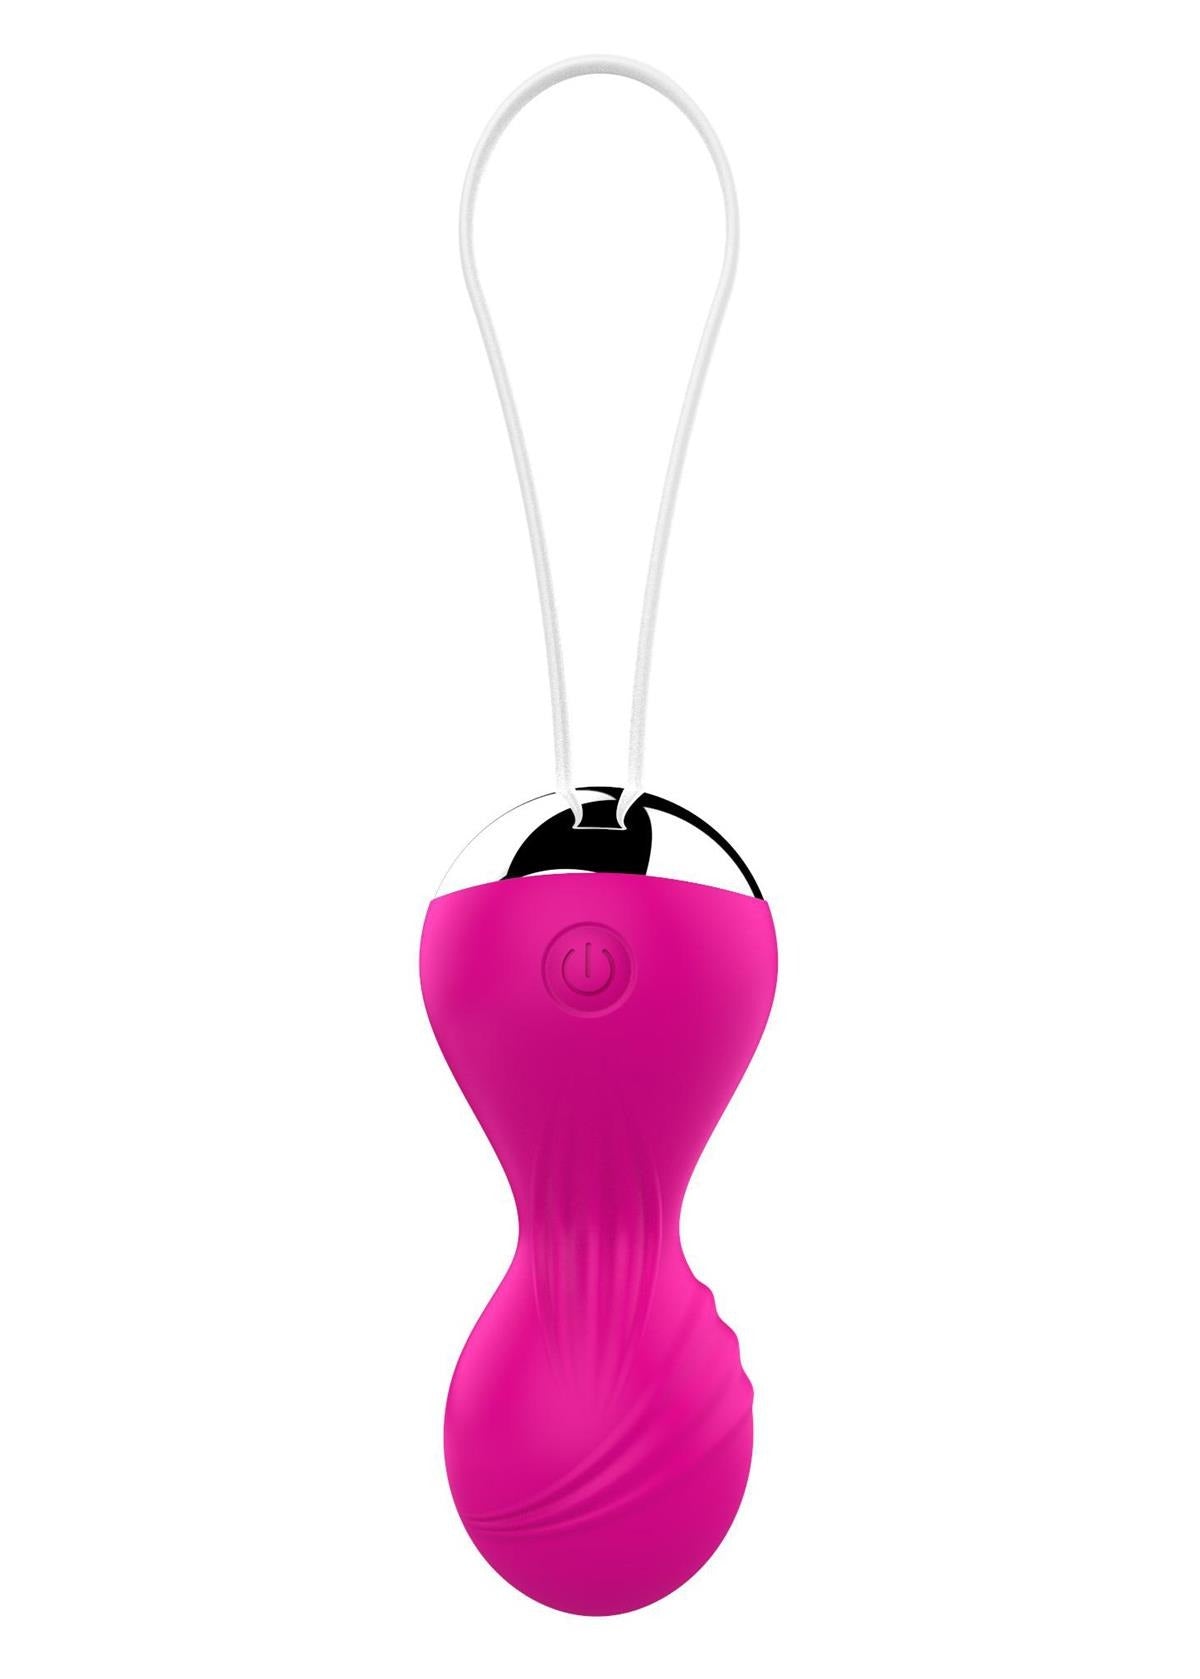 Bossoftoys Vibrating Kegel Balls - Remote Control - Rechargeable - Pink - 22-00027